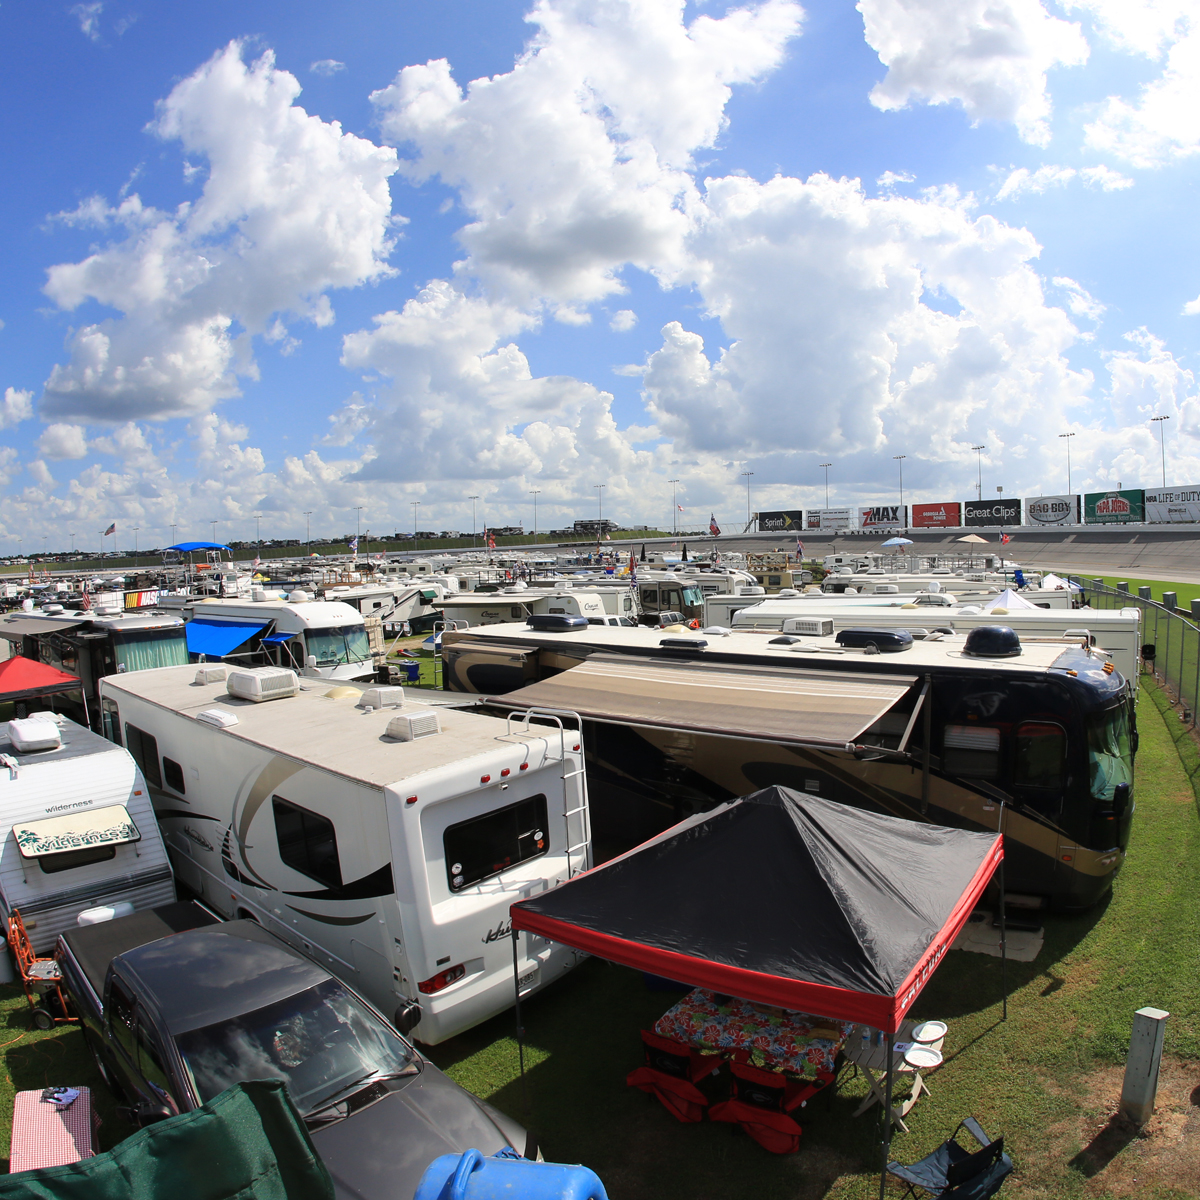 AMS increases size of infield RV camping spaces for 2020 NASCAR weekend | News | Media ...